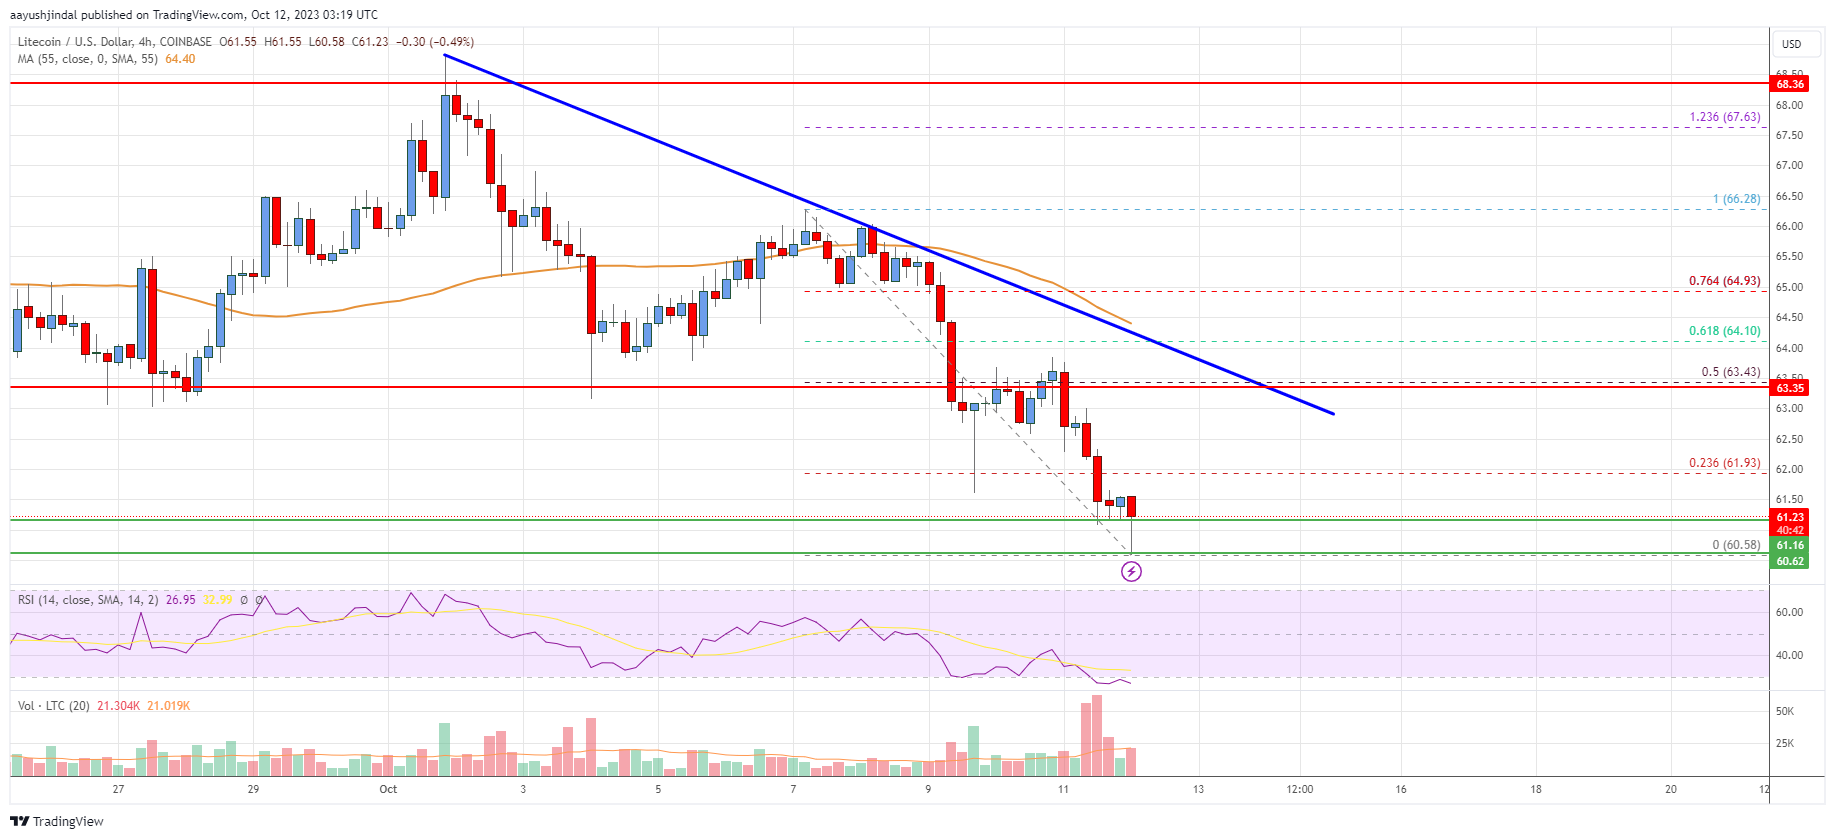 Litecoin (LTC) Price Analysis: Bears Could Remain In Control Below $65